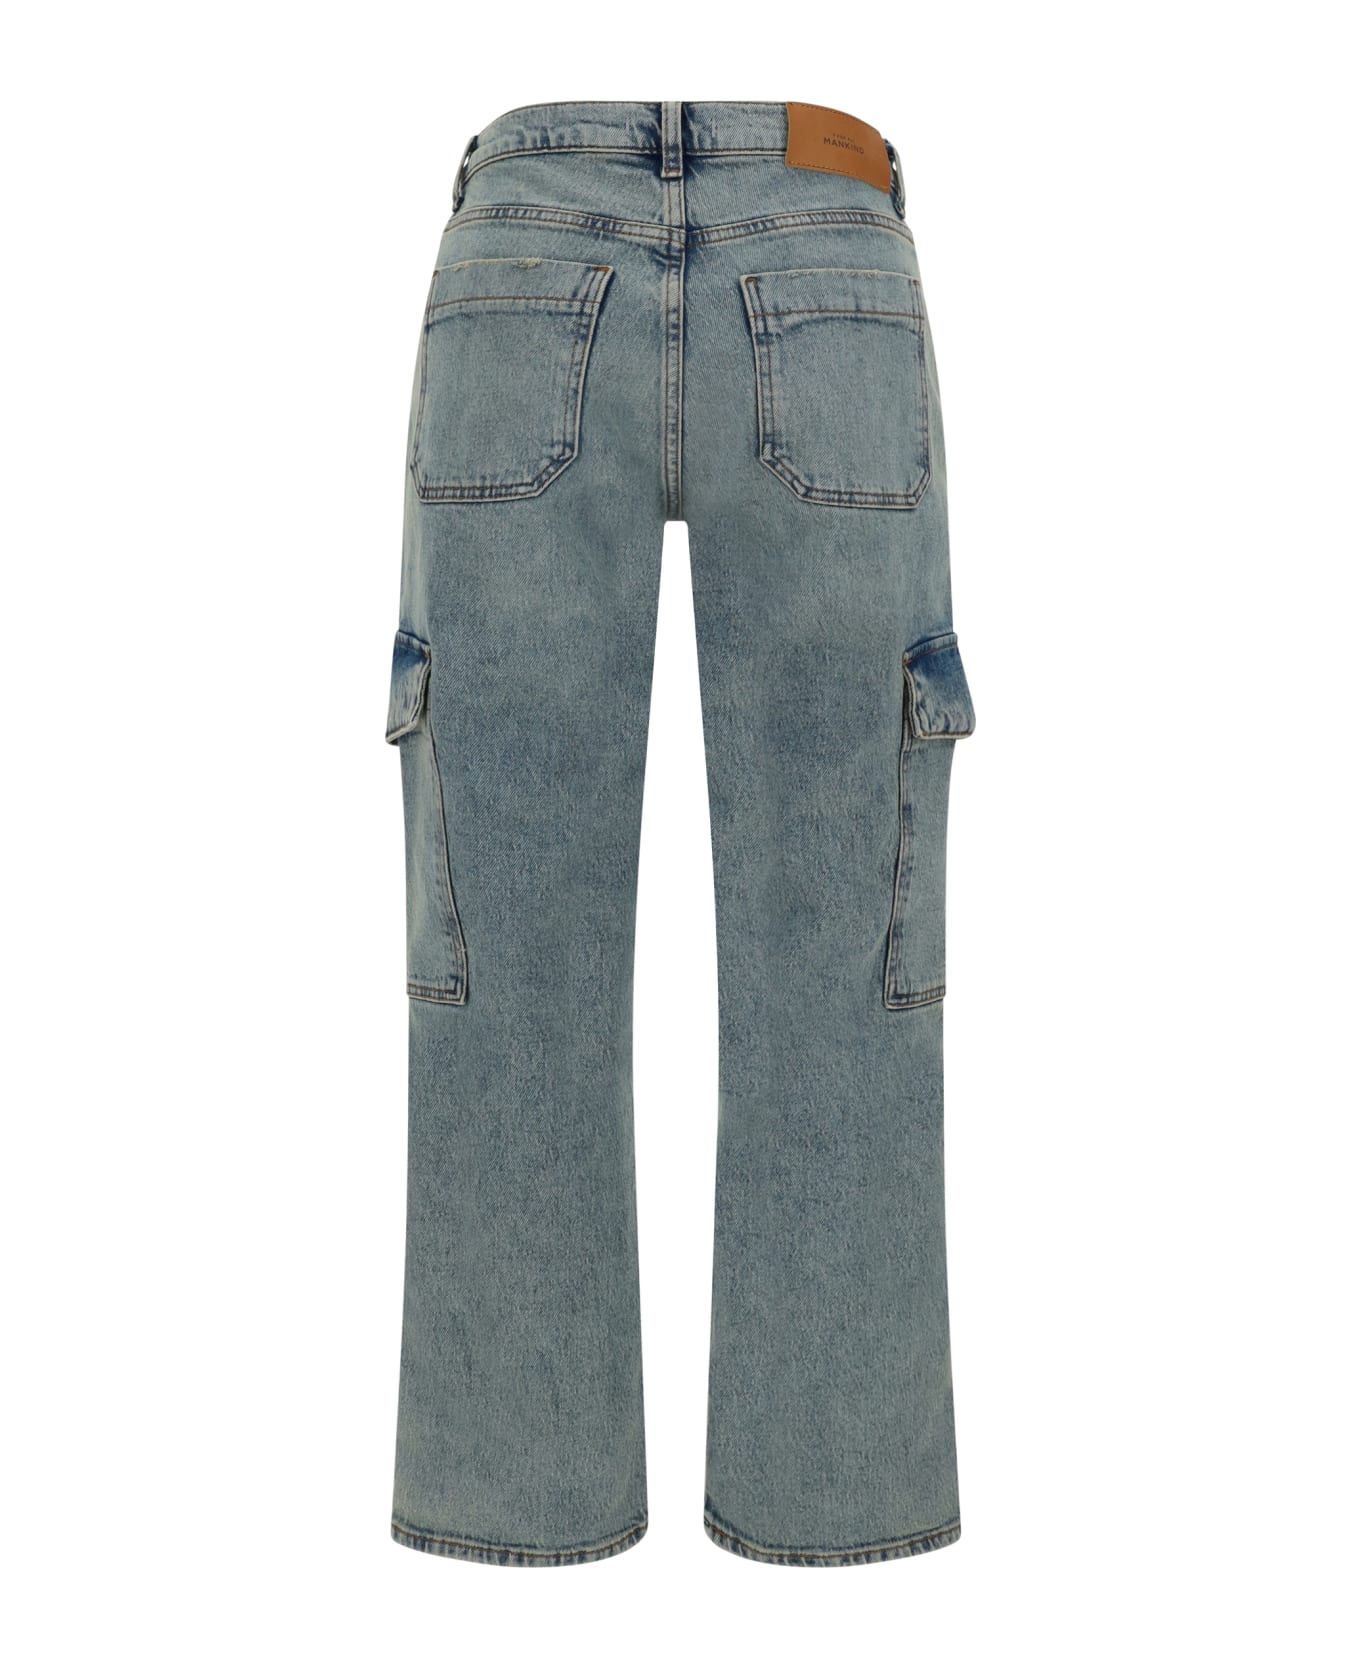 7 For All Mankind Logan Frost Jeans - Light Blue